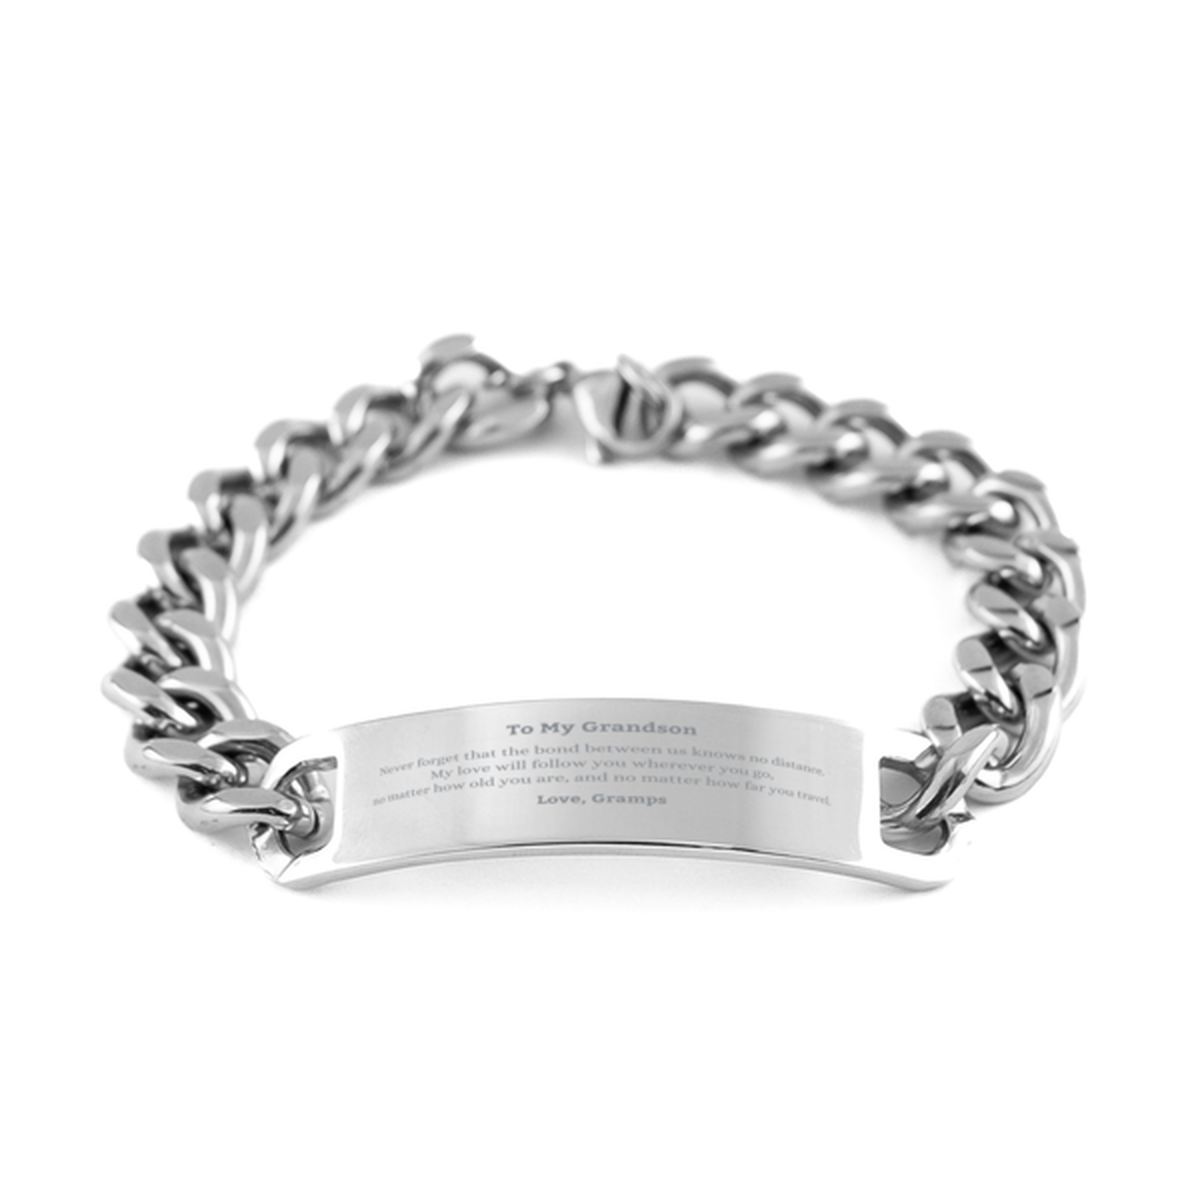 Grandson Birthday Gifts from Gramps, Adjustable Cuban Chain Stainless Steel Bracelet for Grandson Christmas Graduation Unique Gifts Grandson Never forget that the bond between us knows no distance. Love, Gramps